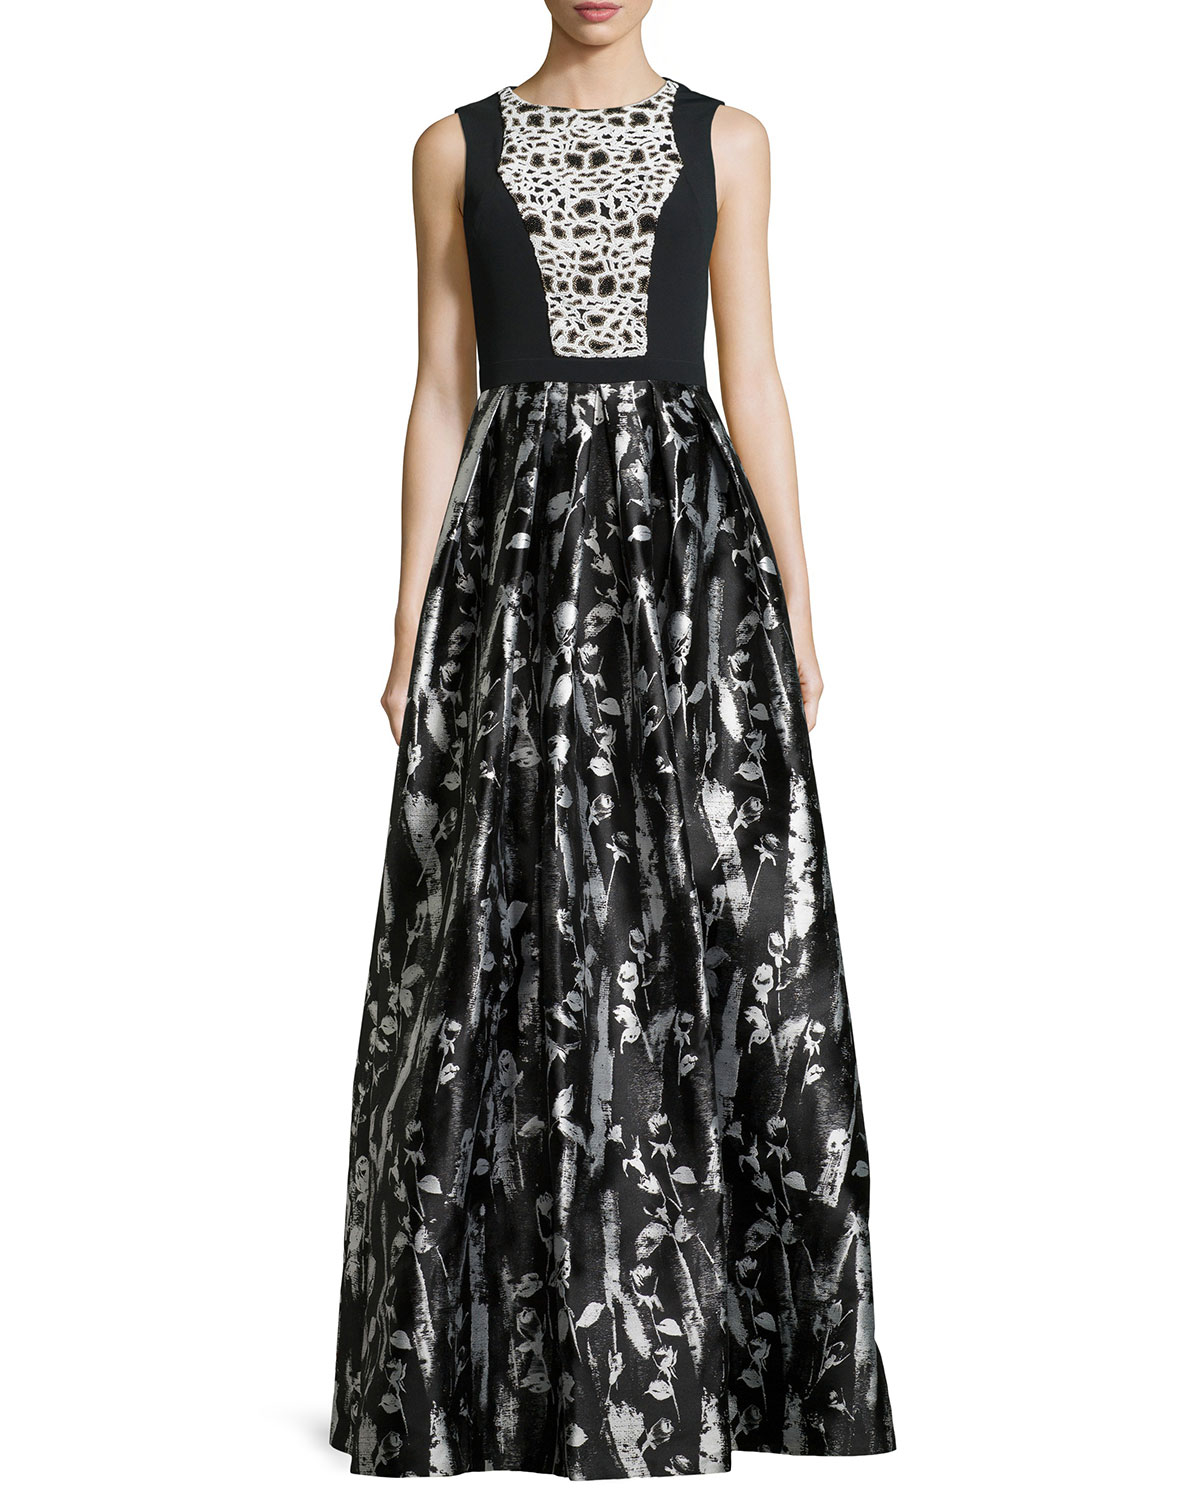 Carmen marc valvo Floral-print Sleeveless Gown in Gray | Lyst